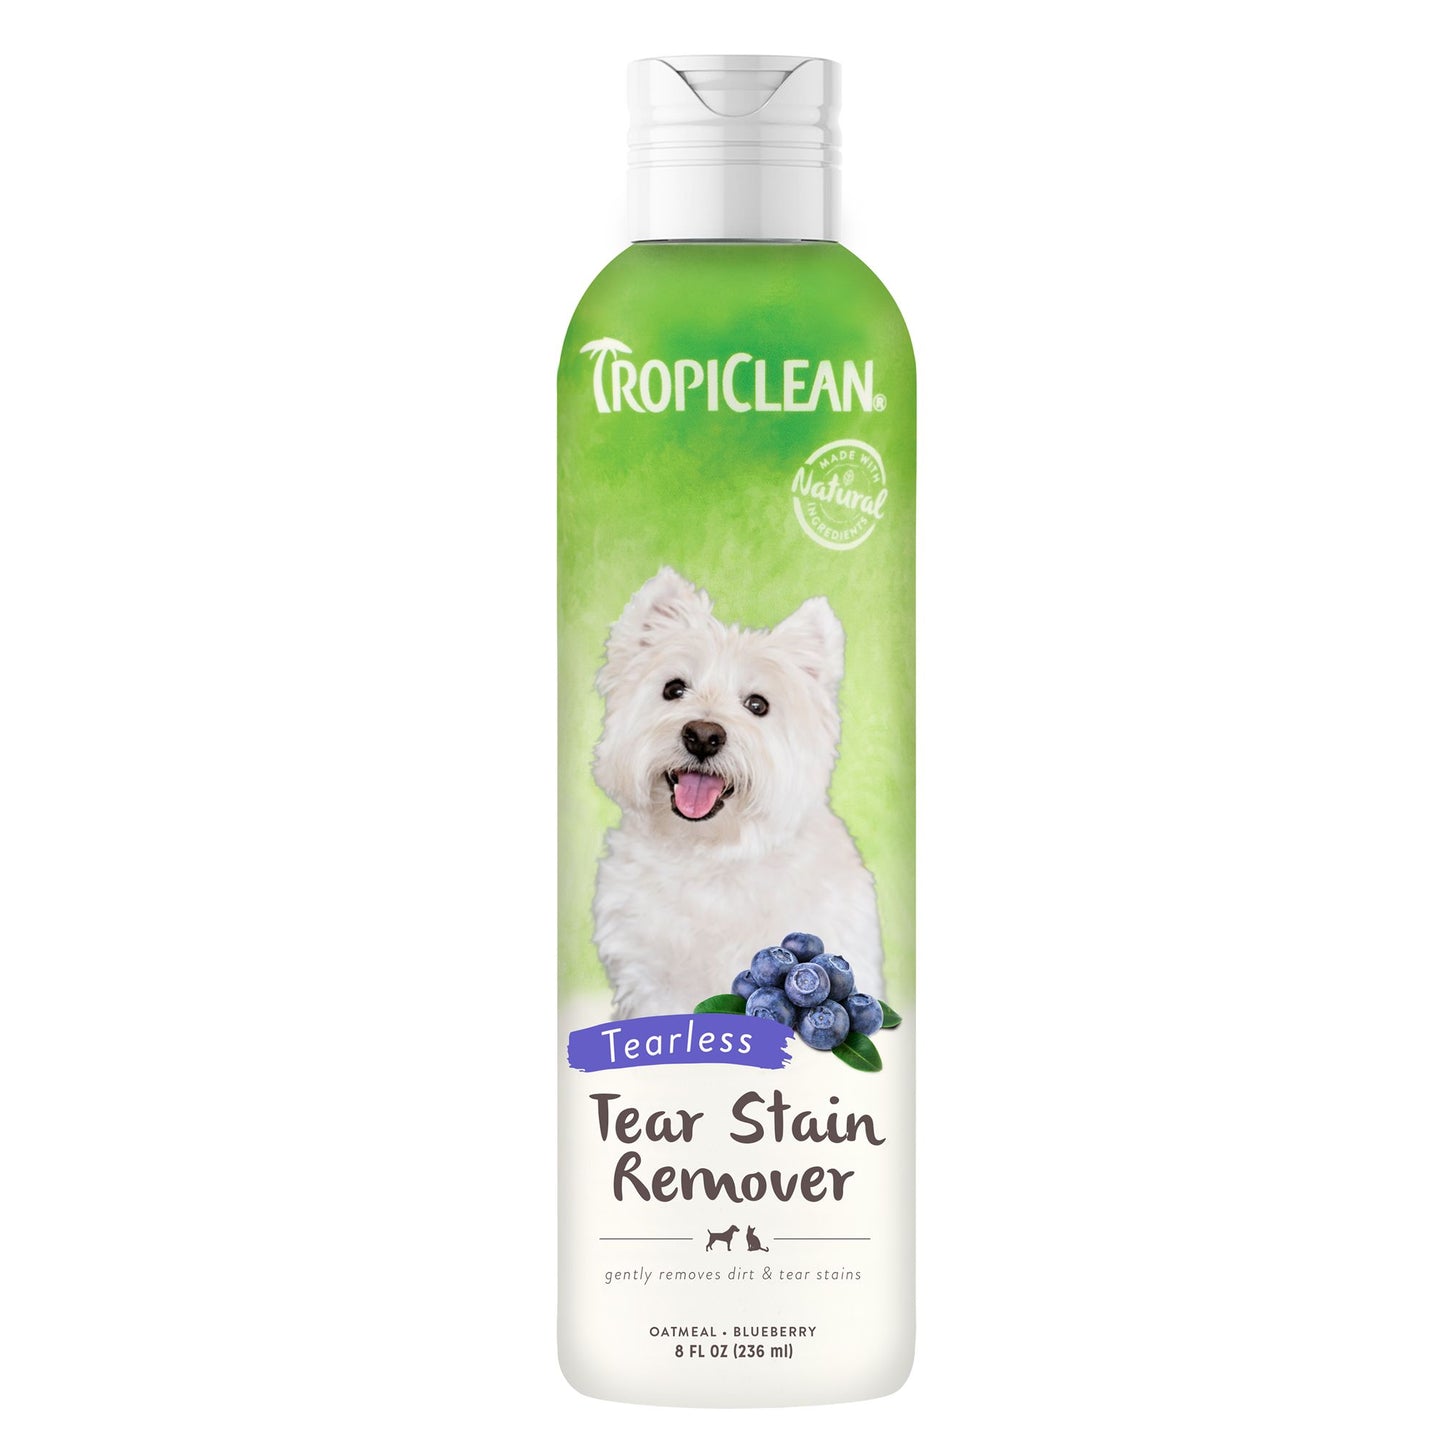 Tropiclean - Tear & Stain remover